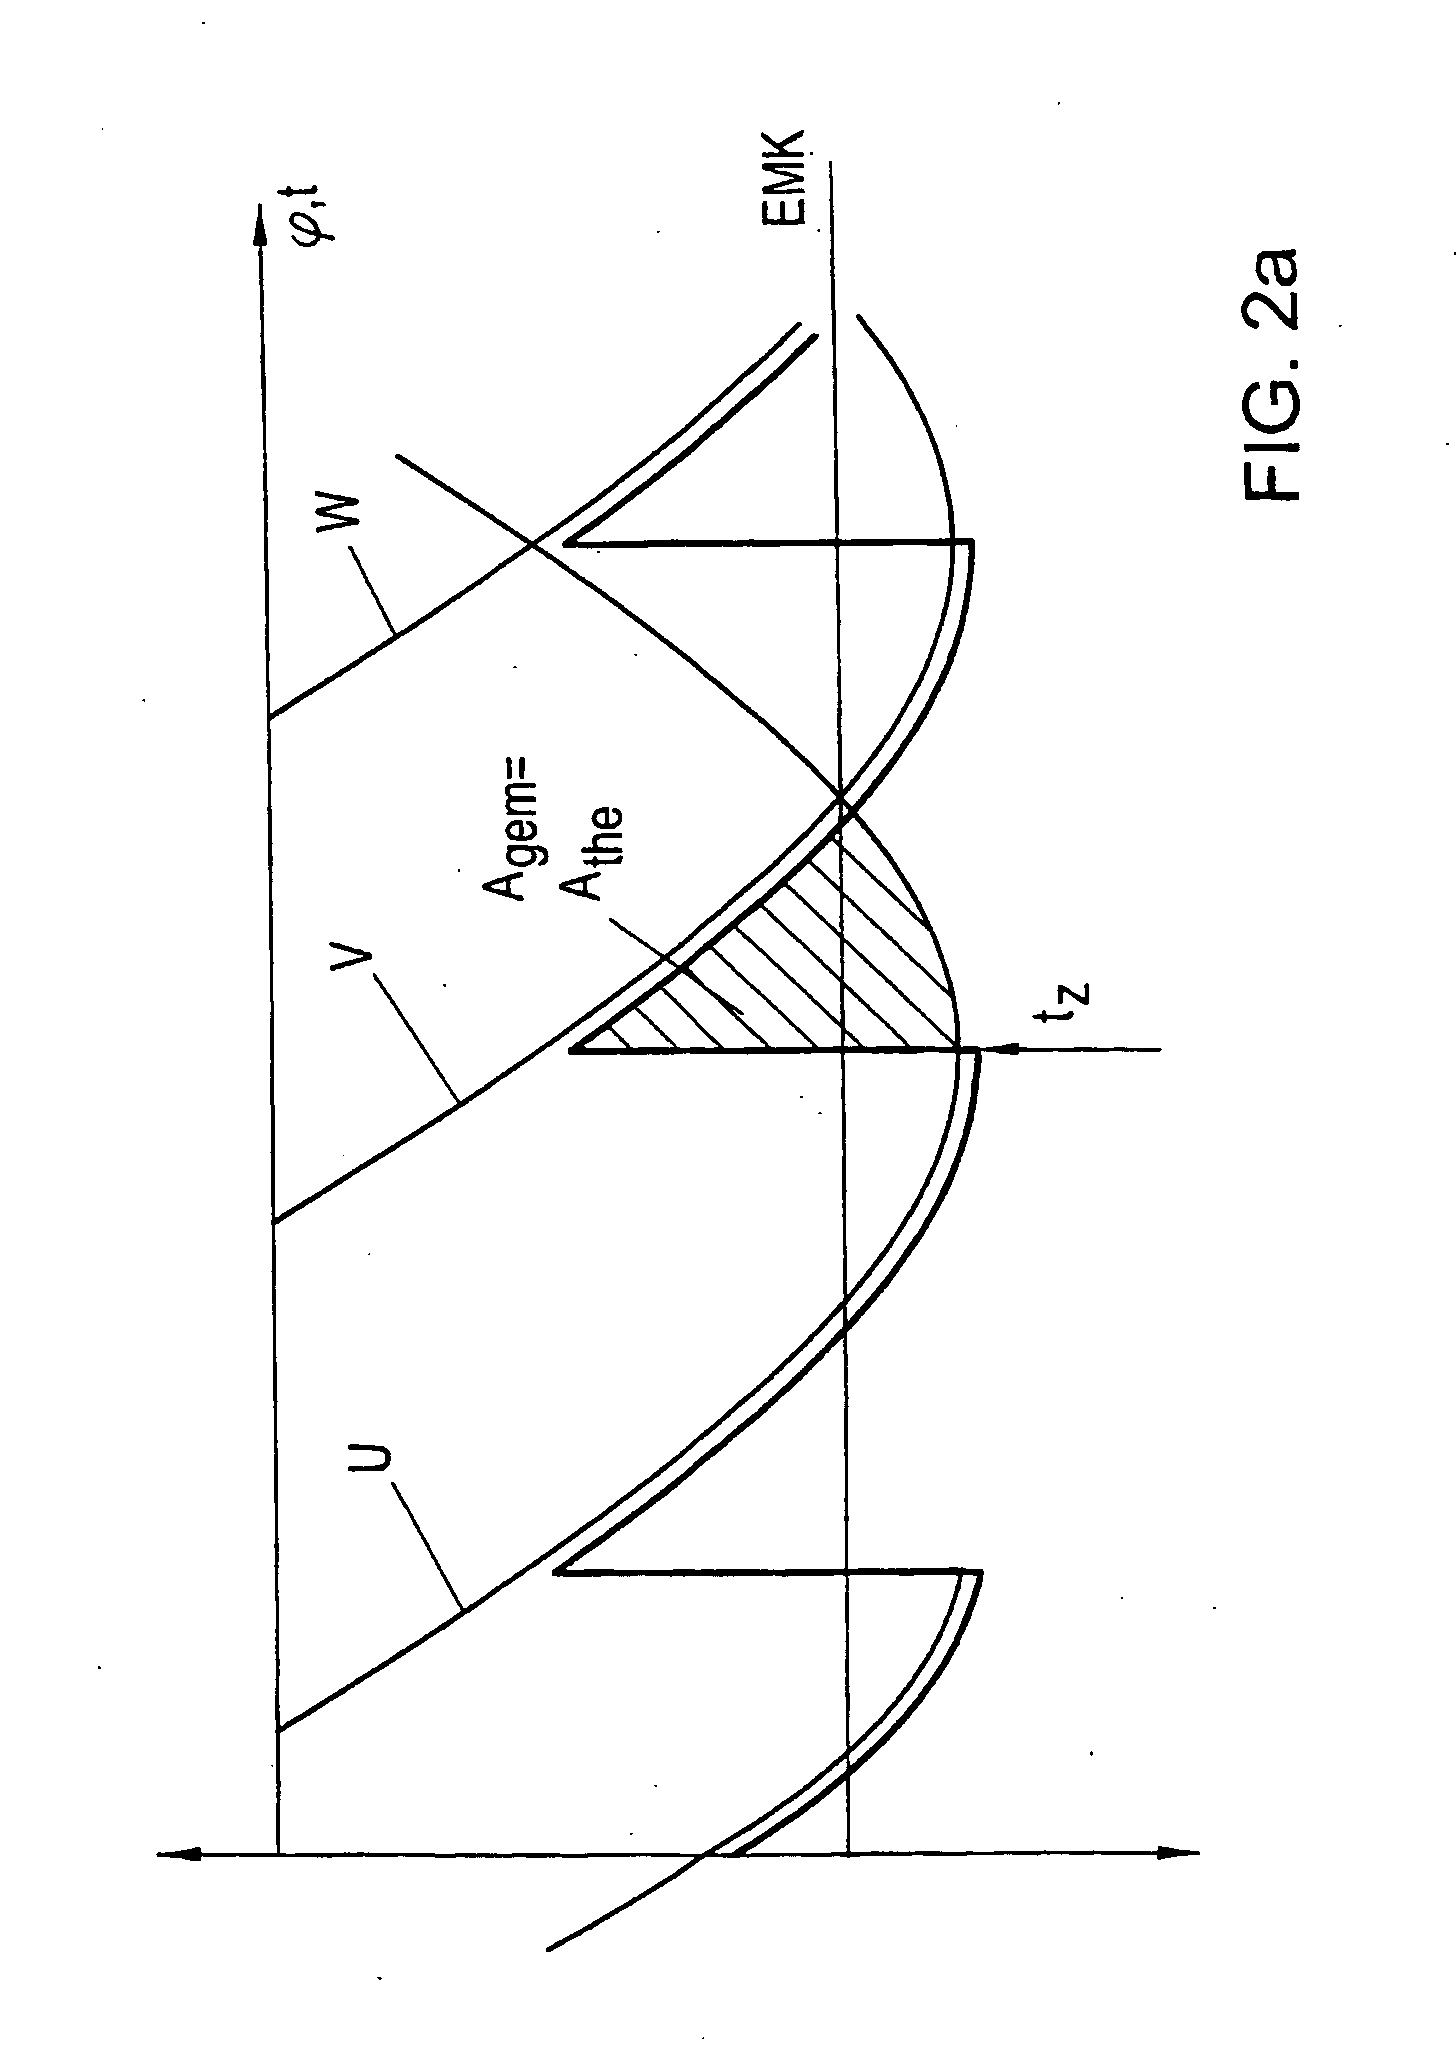 Quenching Device for a Converter Bridge with Line Regeneration